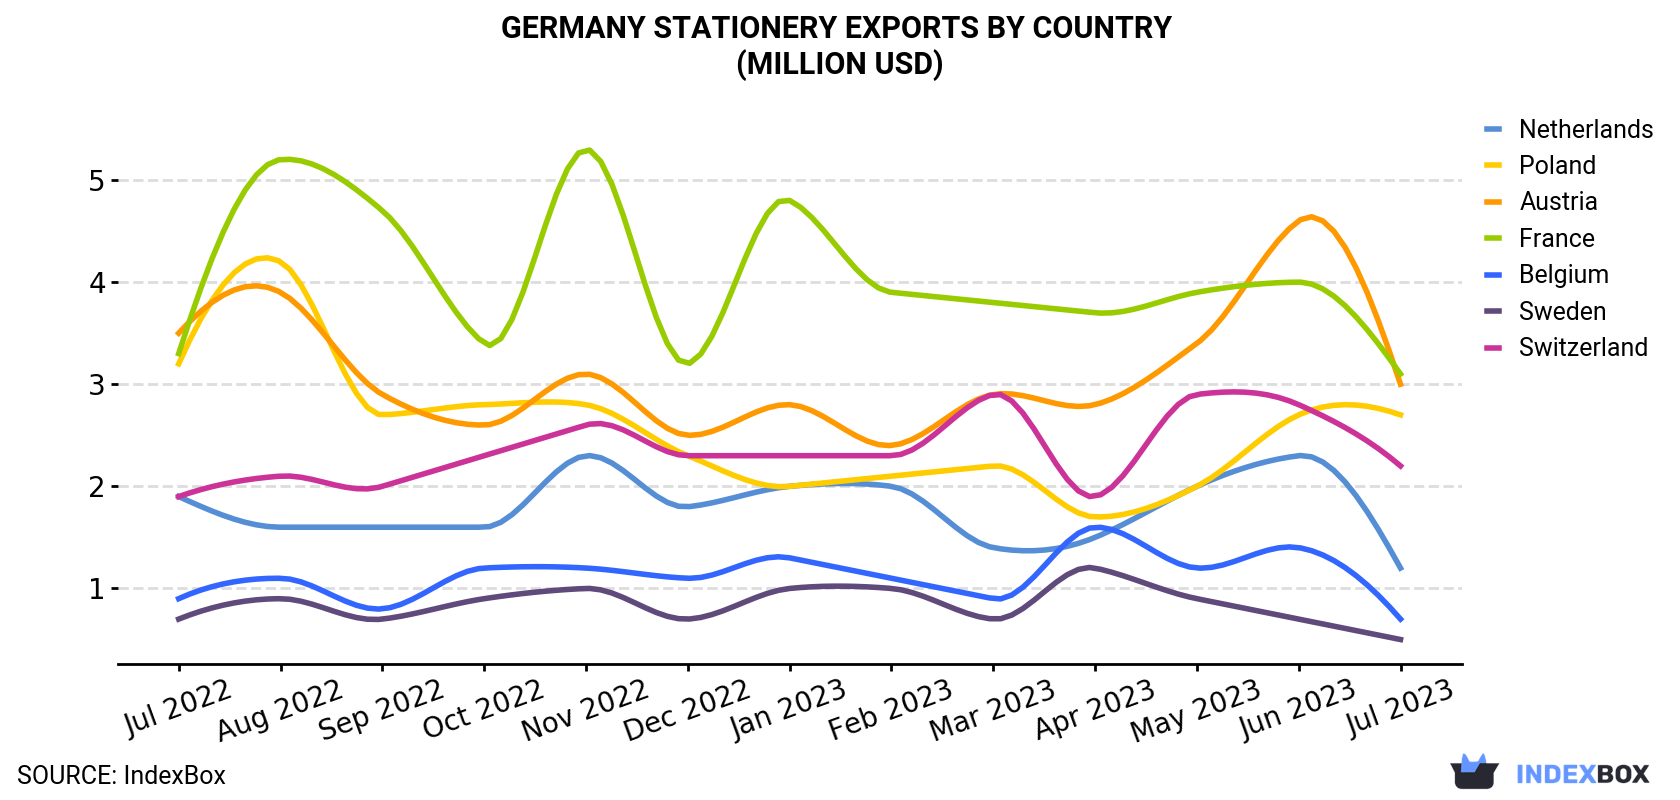 Germany Stationery Exports By Country (Million USD)